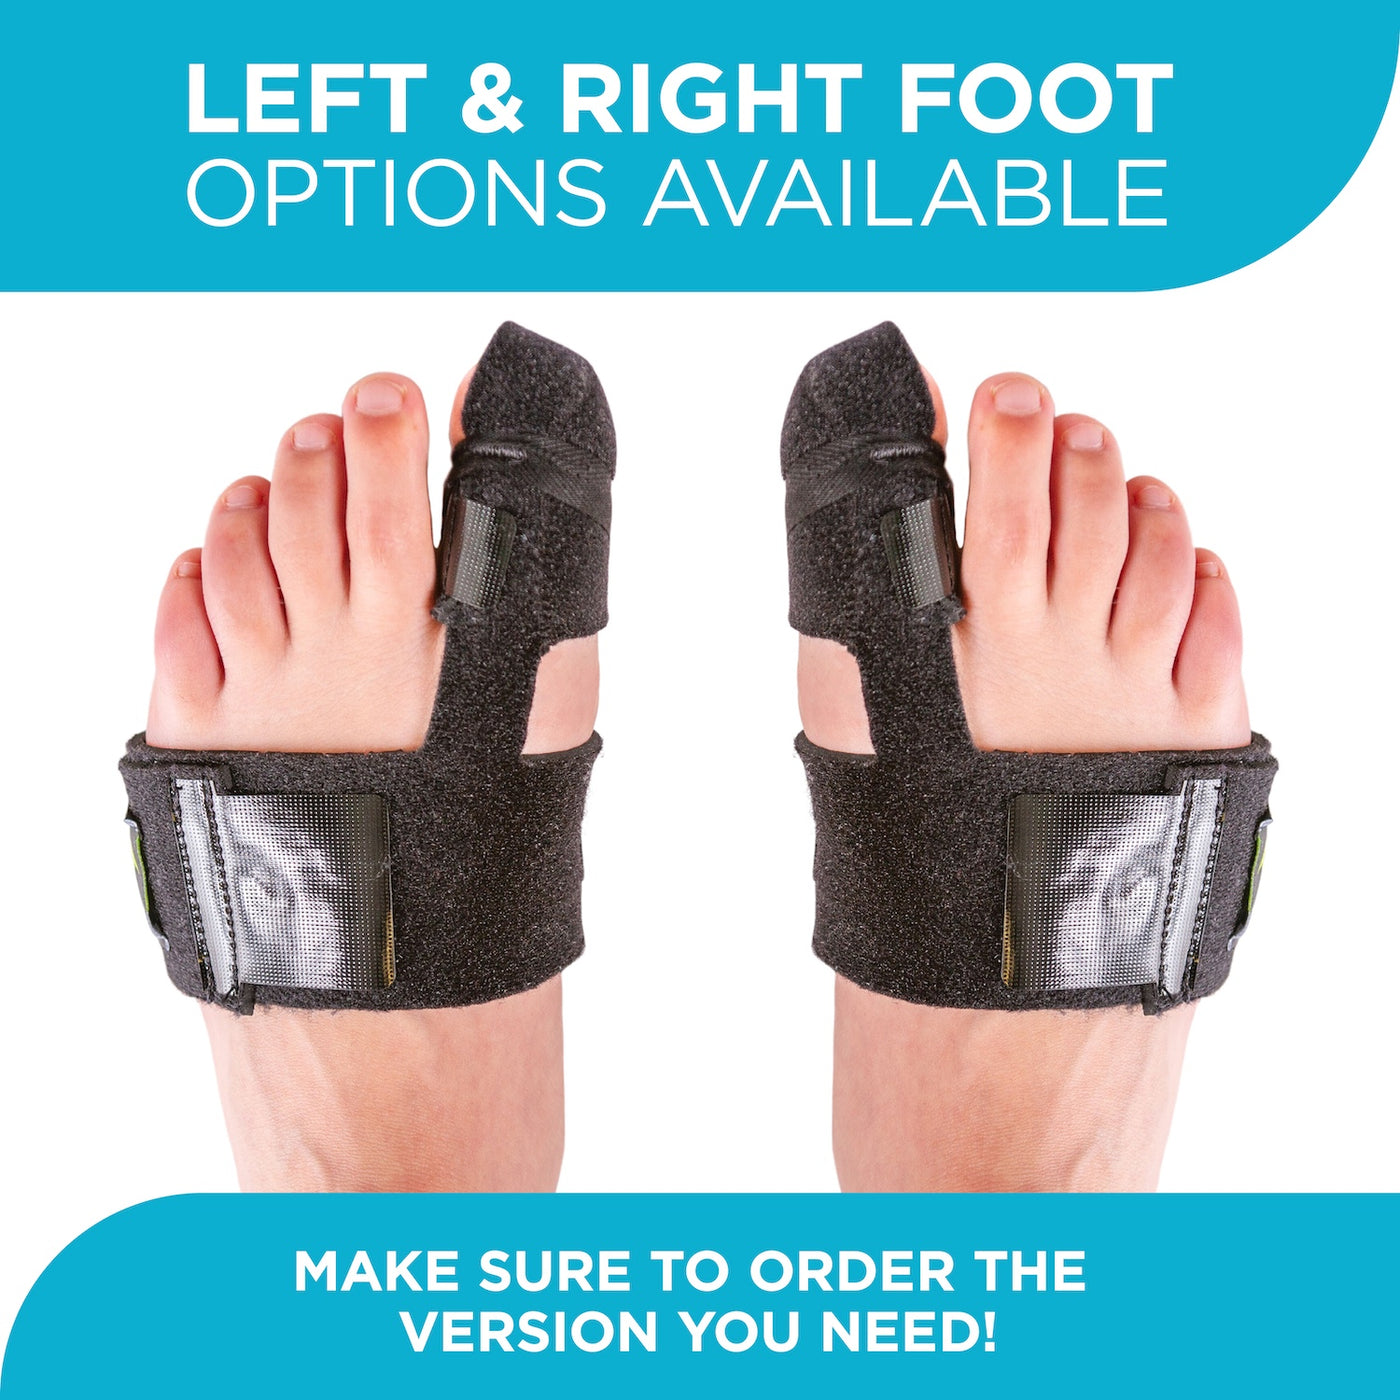 The turf toe support comes in right foot and left foot options so make sure to order the correct one